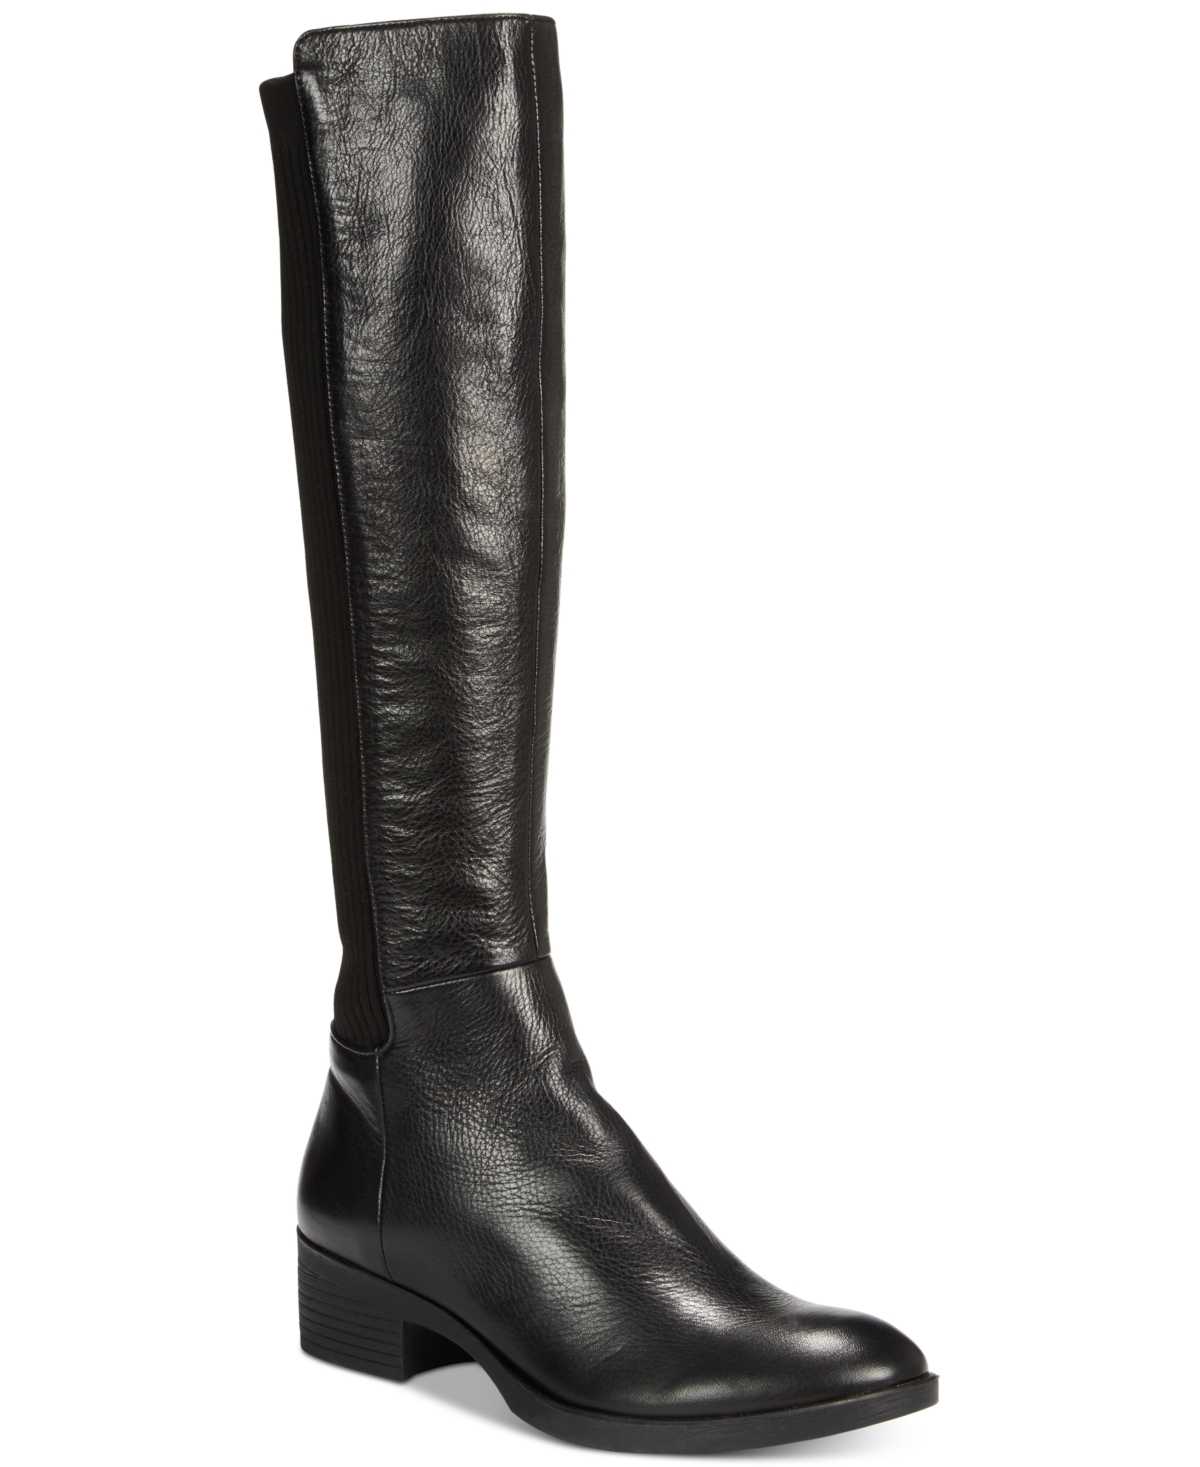 Kenneth Cole New York Women's Levon Tall Riding Boots Women's Shoes